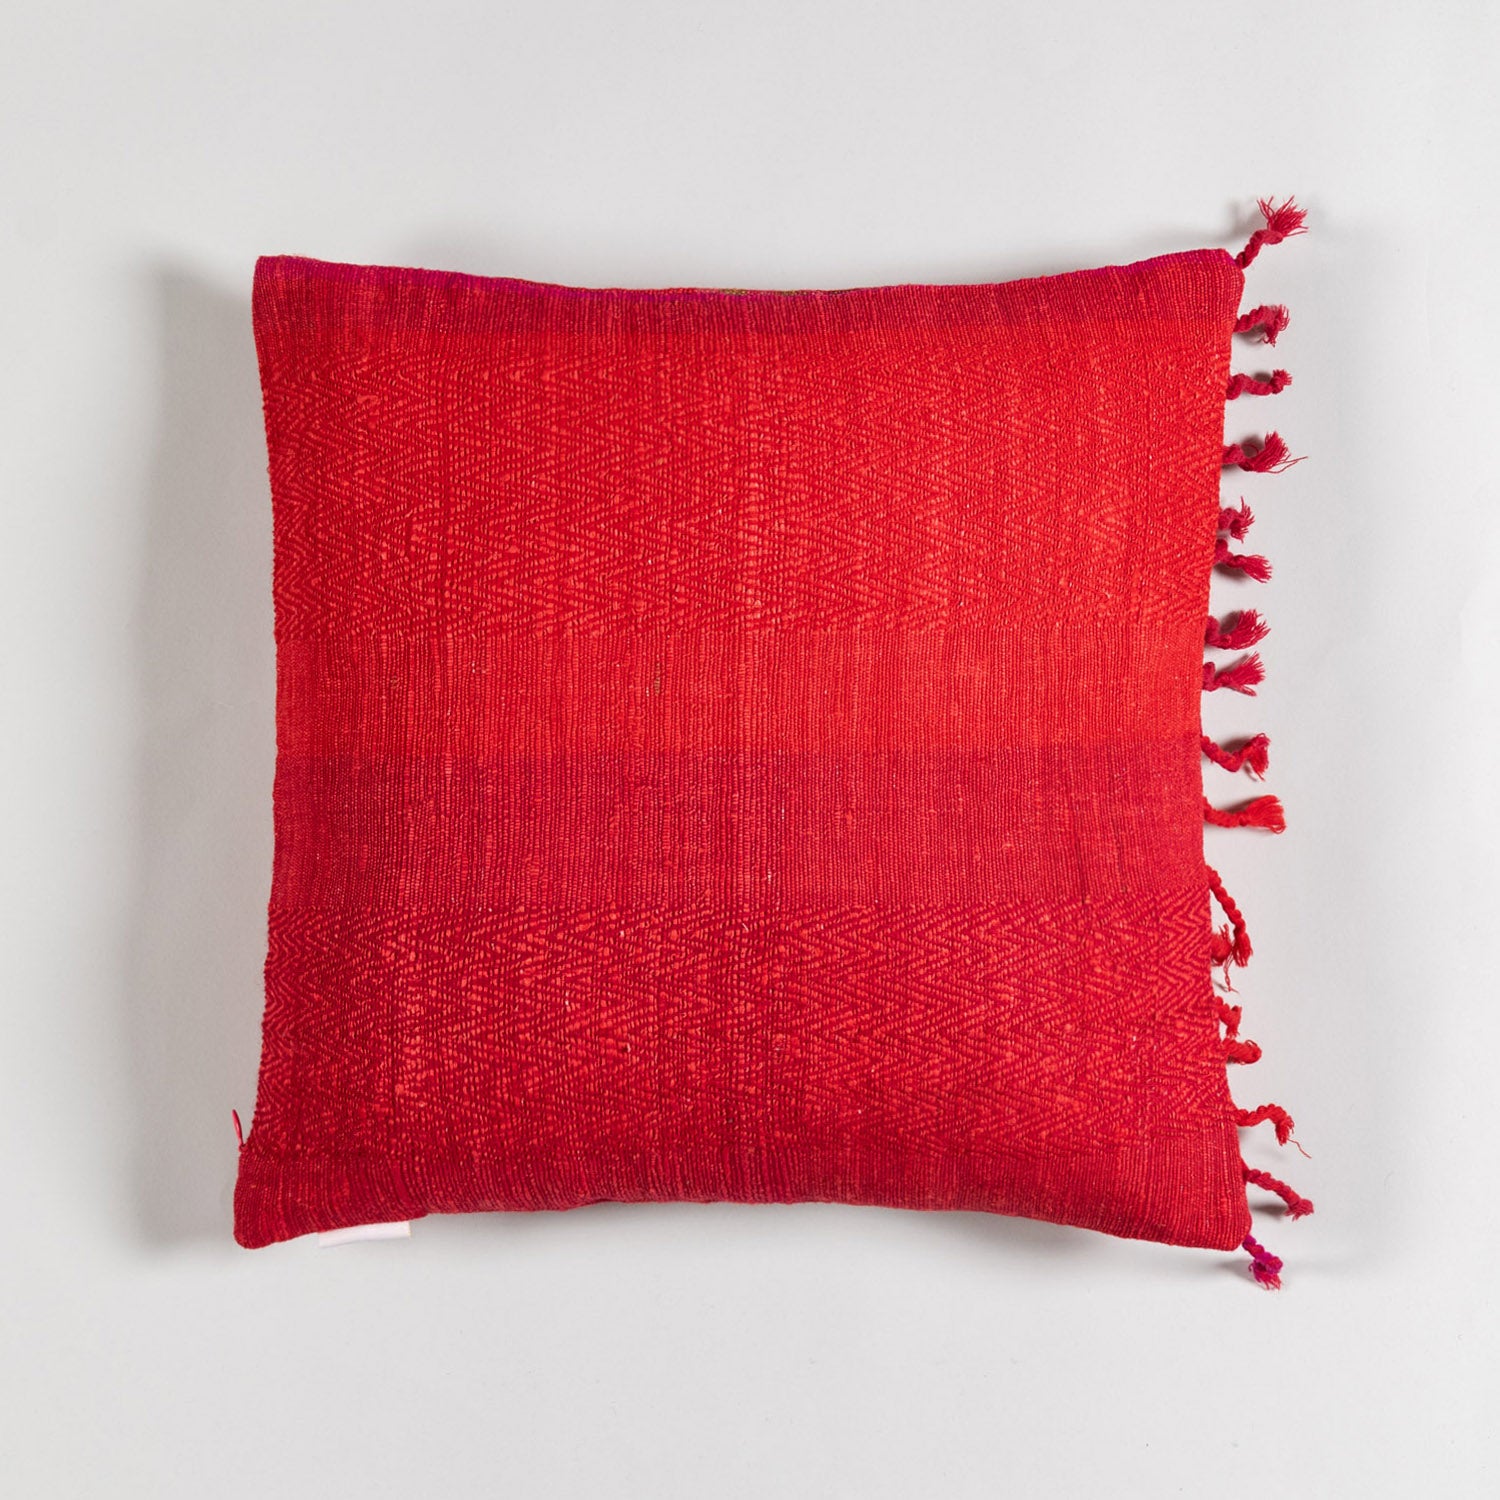 Handwoven Upcycled Red Wool & Oak Silk Cushion Cover - 16x16